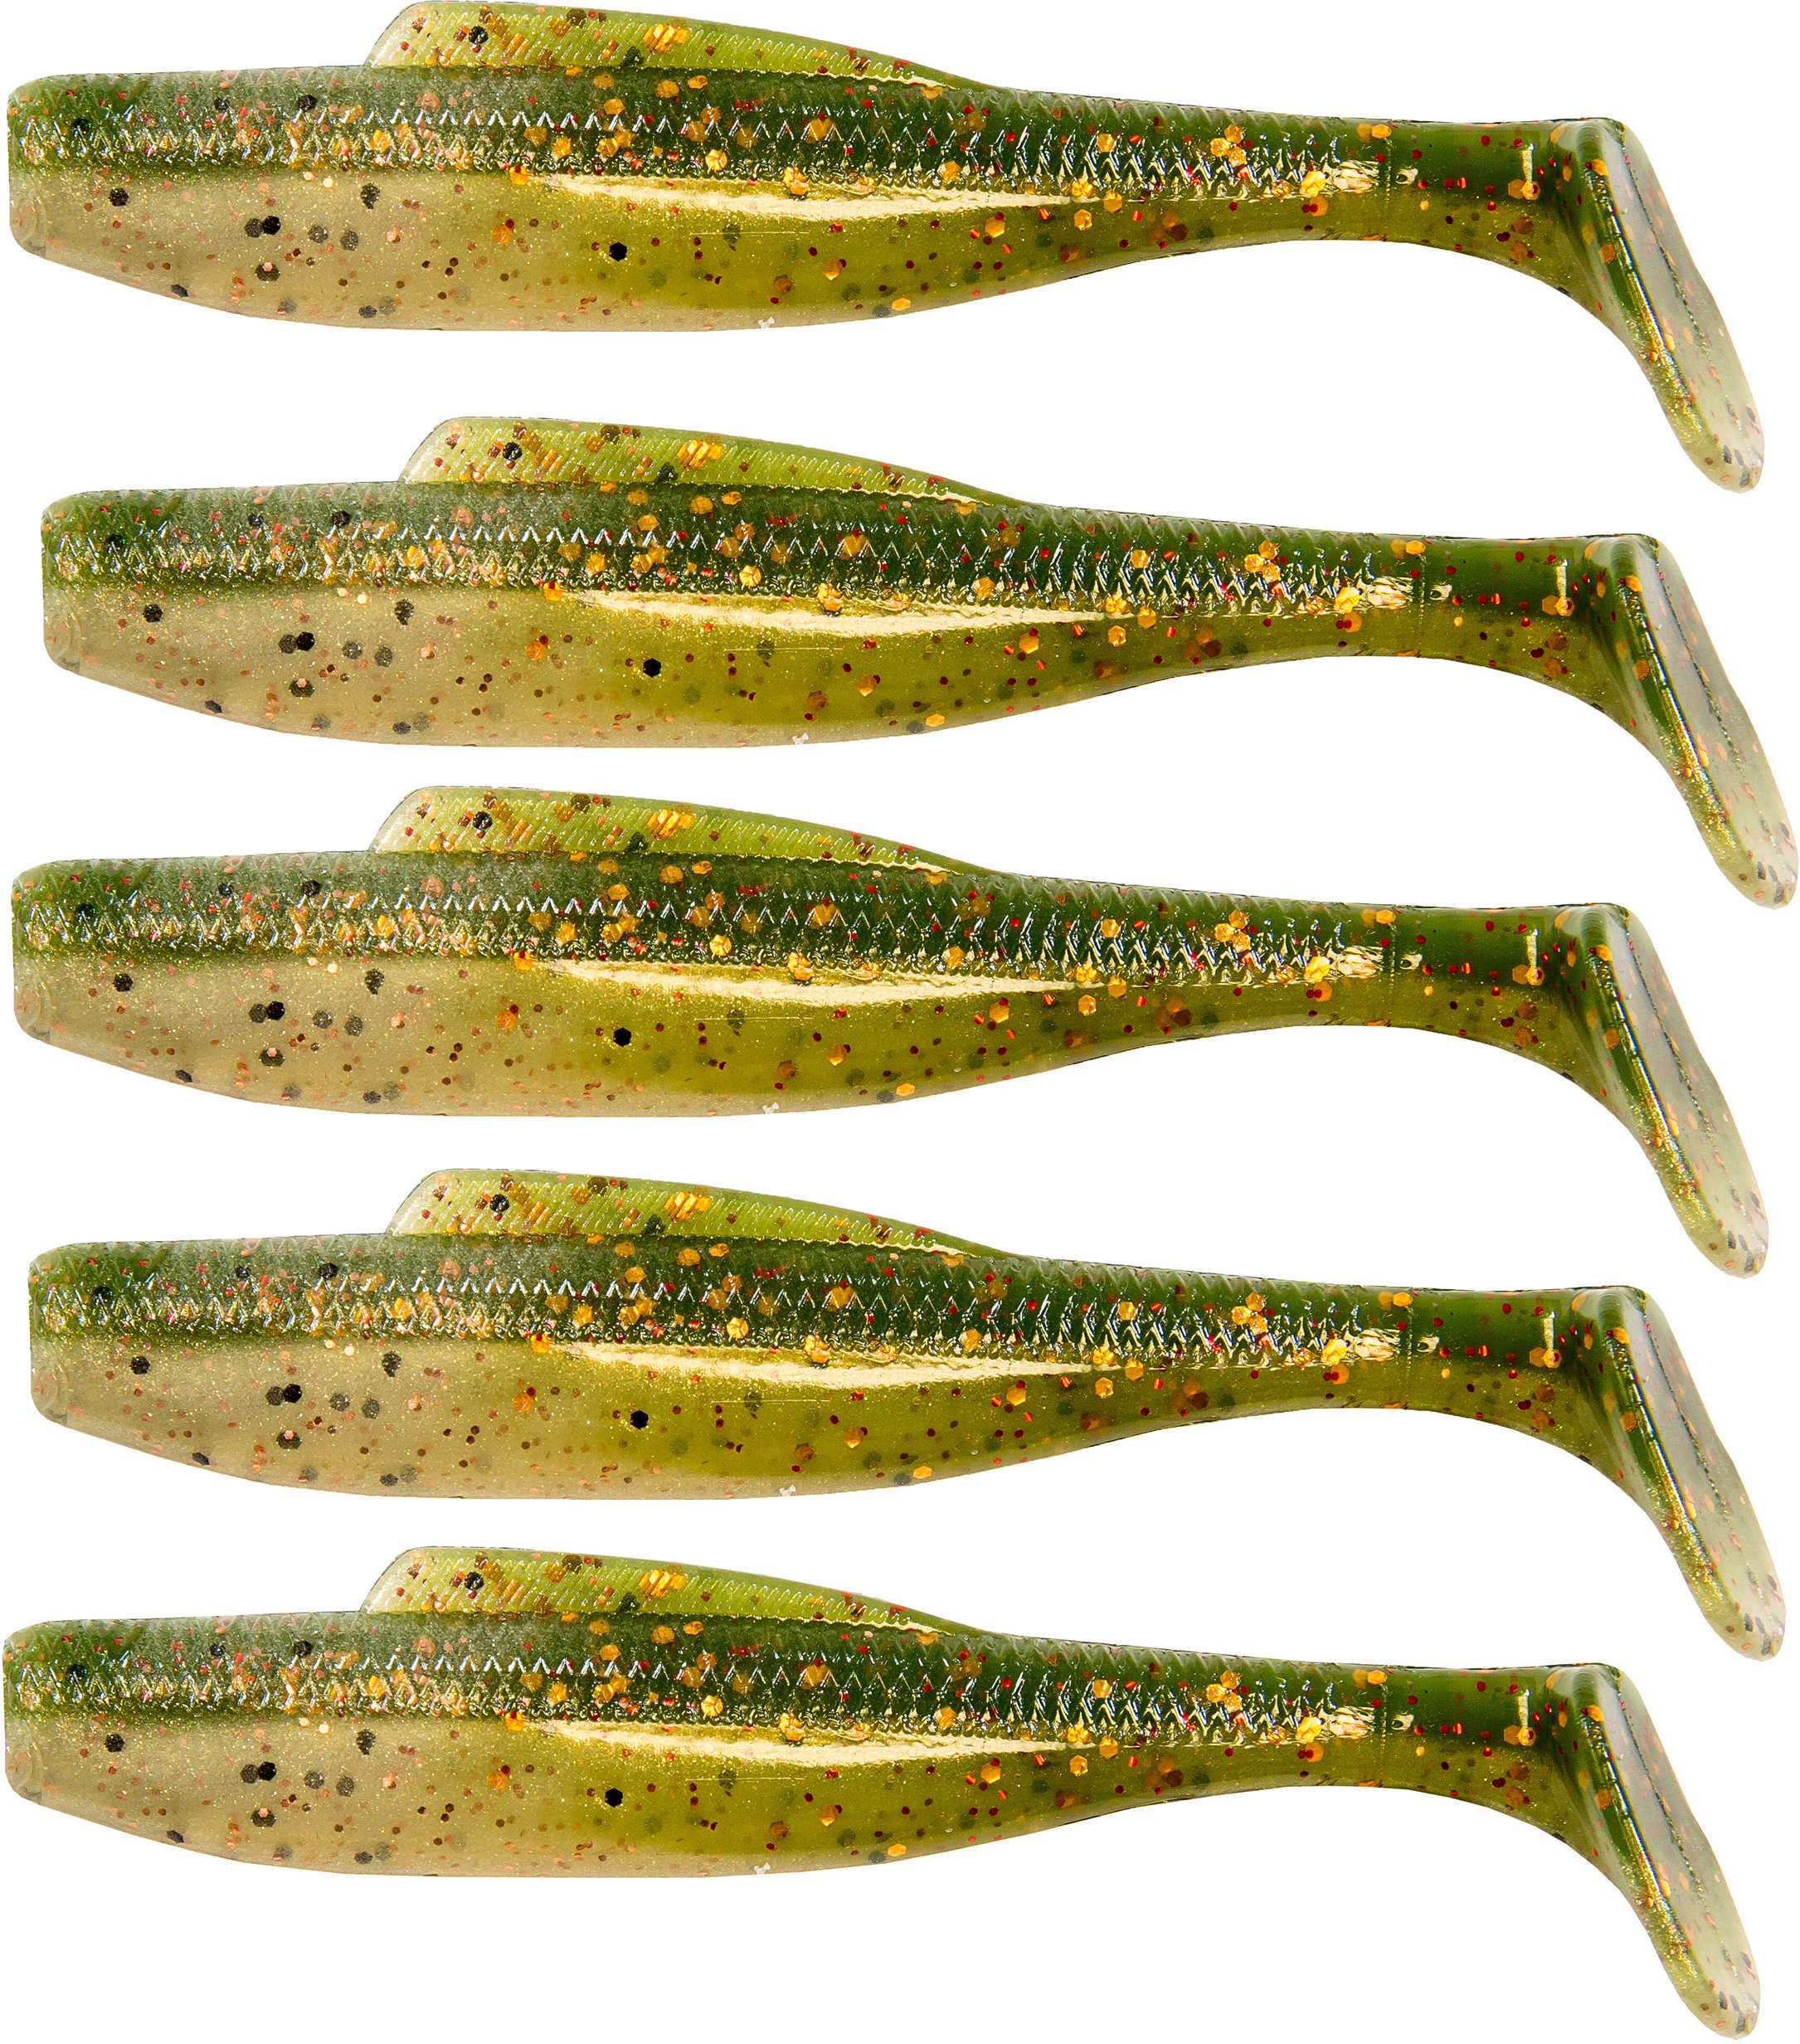 Z-Man DieZel MinnowZ Lures 4" Length, Redfish Toad, Package of 5